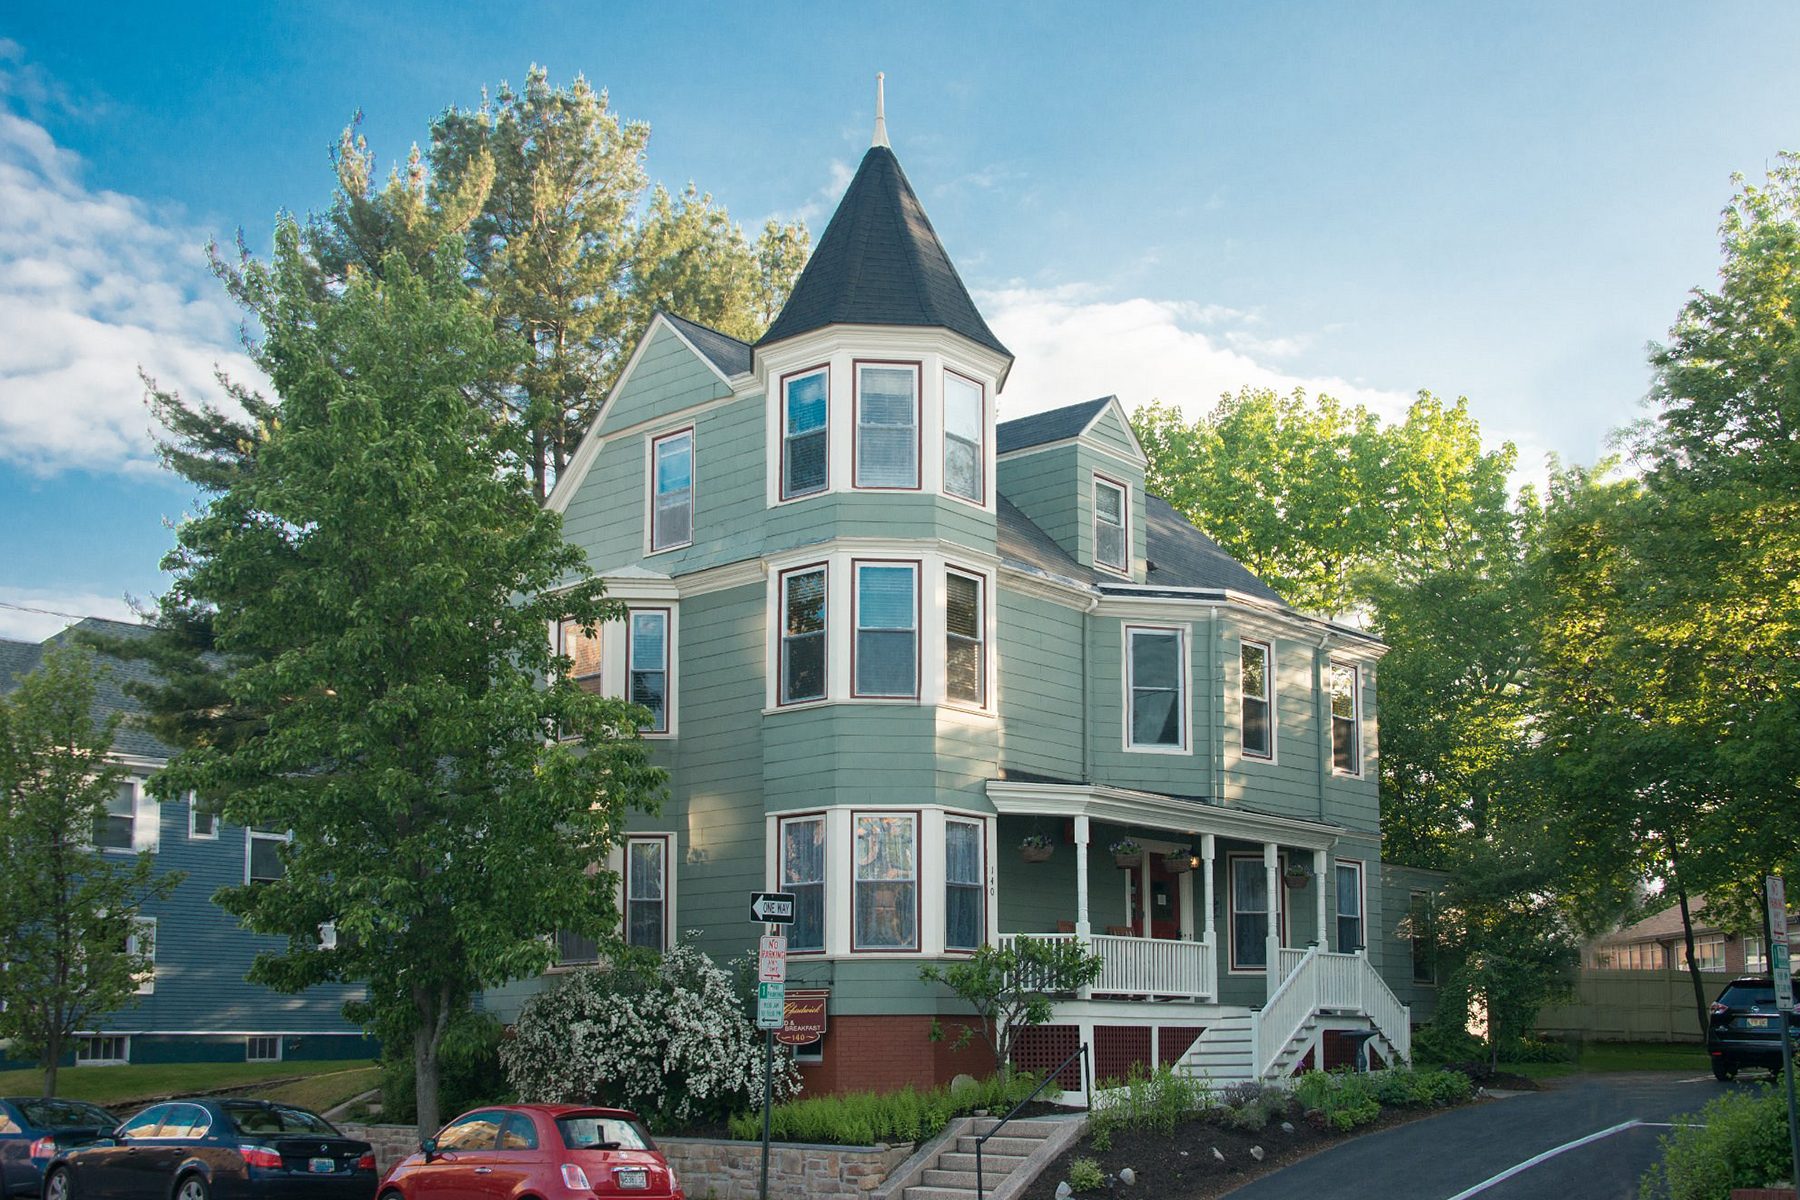 <h3 class="">Portland, Maine</h3> <p class=""><strong>Best for: </strong>A welcoming retreat when exploring Portland and coastal Maine</p> <p>The innkeepers, Erin Abraham and Zack Jellis, their daughter—and their three rescue Siberian huskies—are your gracious hosts at the <a href="https://www.tripadvisor.com/Hotel_Review-g40827-d1070602-Reviews-The_Chadwick_Bed_Breakfast-Portland_Maine.html" rel="noopener">Chadwick Bed & Breakfast</a>. Guests love the delicious home-cooked breakfasts (whipped up by Abraham), the ideal location and the added bonus of getting to pet the pups during their stay. The original home was built in 1891, and today, the property has four distinct guest rooms (that have recently been refreshed) with either a queen- or king-size bed, an electric fireplace, a private bathroom and modern amenities.</p> <p>In the morning, guests will awake to a gourmet breakfast in the dining room with locally inspired dishes like Maine lobster eggs Benedict with lemon-herb butter. There are also 24-hour-a-day snacks and hot and cold beverages; complimentary access to Netflix, HuluPlus and Amazon Prime Video; and a garden with Adirondack chairs and a fire pit to stay warm on cool Maine evenings. The property is also focused on sustainability, boasting green initiatives like composting and using eco-friendly Comphy bed linens, low-energy LED light bulbs and more.</p> <p><strong>Pros:</strong></p> <ul> <li class="">Conveniently located near Portland's Arts District and the Old Port</li> <li class="">Off-street parking</li> <li class="">Recently renovated accommodations</li> </ul> <p><strong>Cons:</strong></p> <ul> <li class="">All rooms are on the second floor, and there is no elevator</li> <li class="">Guests must be 14 years of age or older to stay at the property</li> </ul> <p class="listicle-page__cta-button-shop"><a class="shop-btn" href="https://www.tripadvisor.com/Hotel_Review-g40827-d1070602-Reviews-The_Chadwick_Bed_Breakfast-Portland_Maine.html">Book Now</a></p>